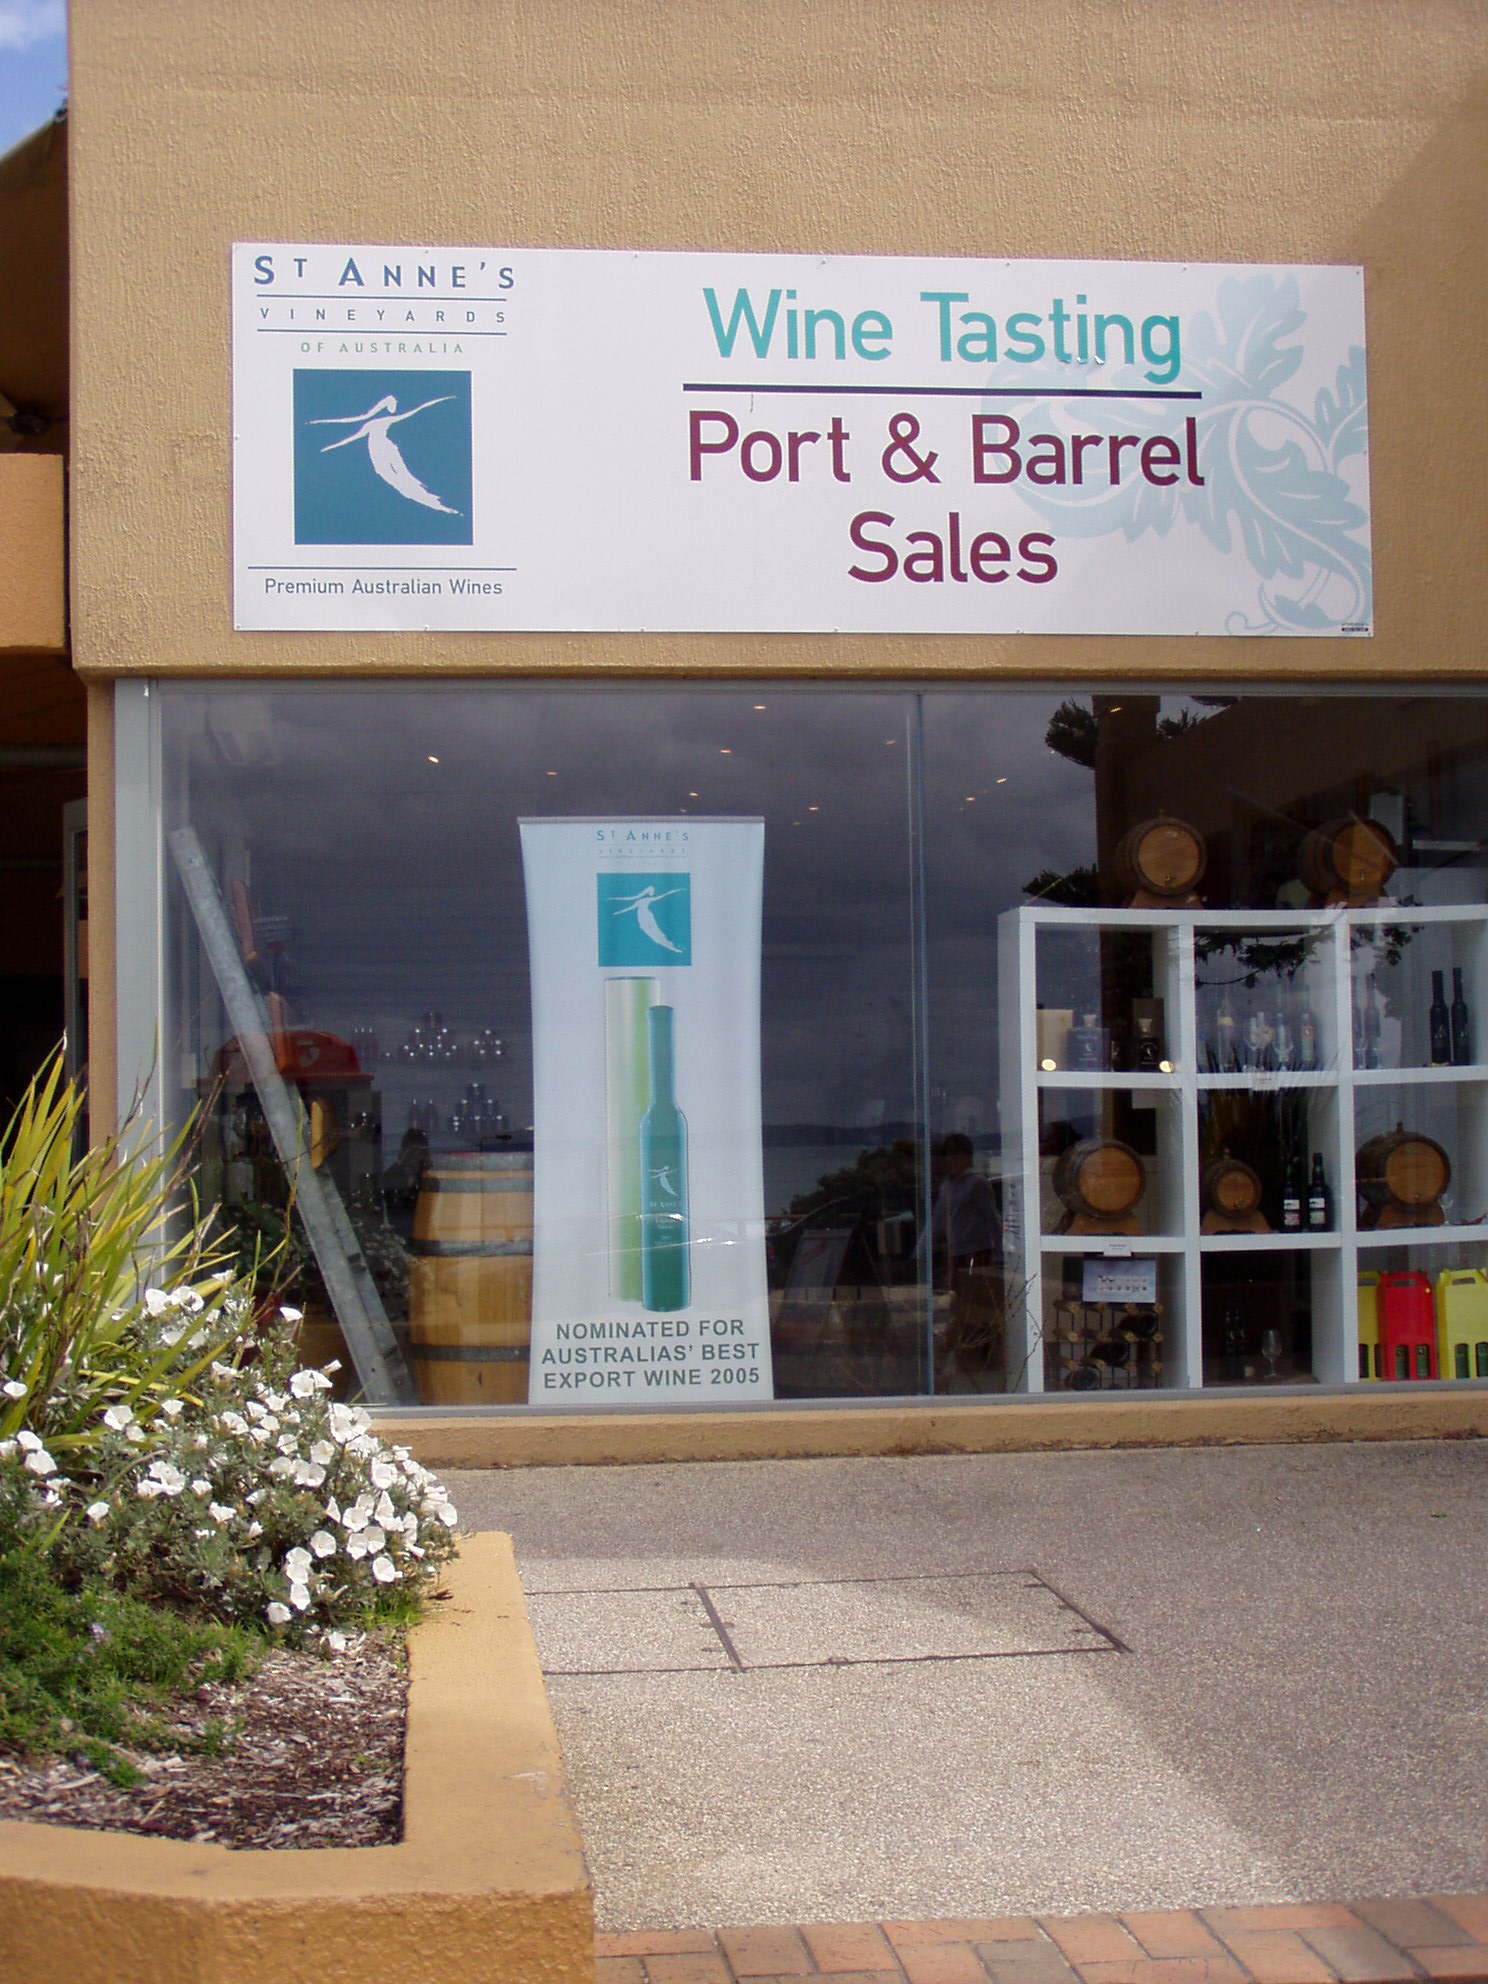 Wine Tasting with Port & Barrel Sales at St Anne's Vineyard Stockists in Lorne